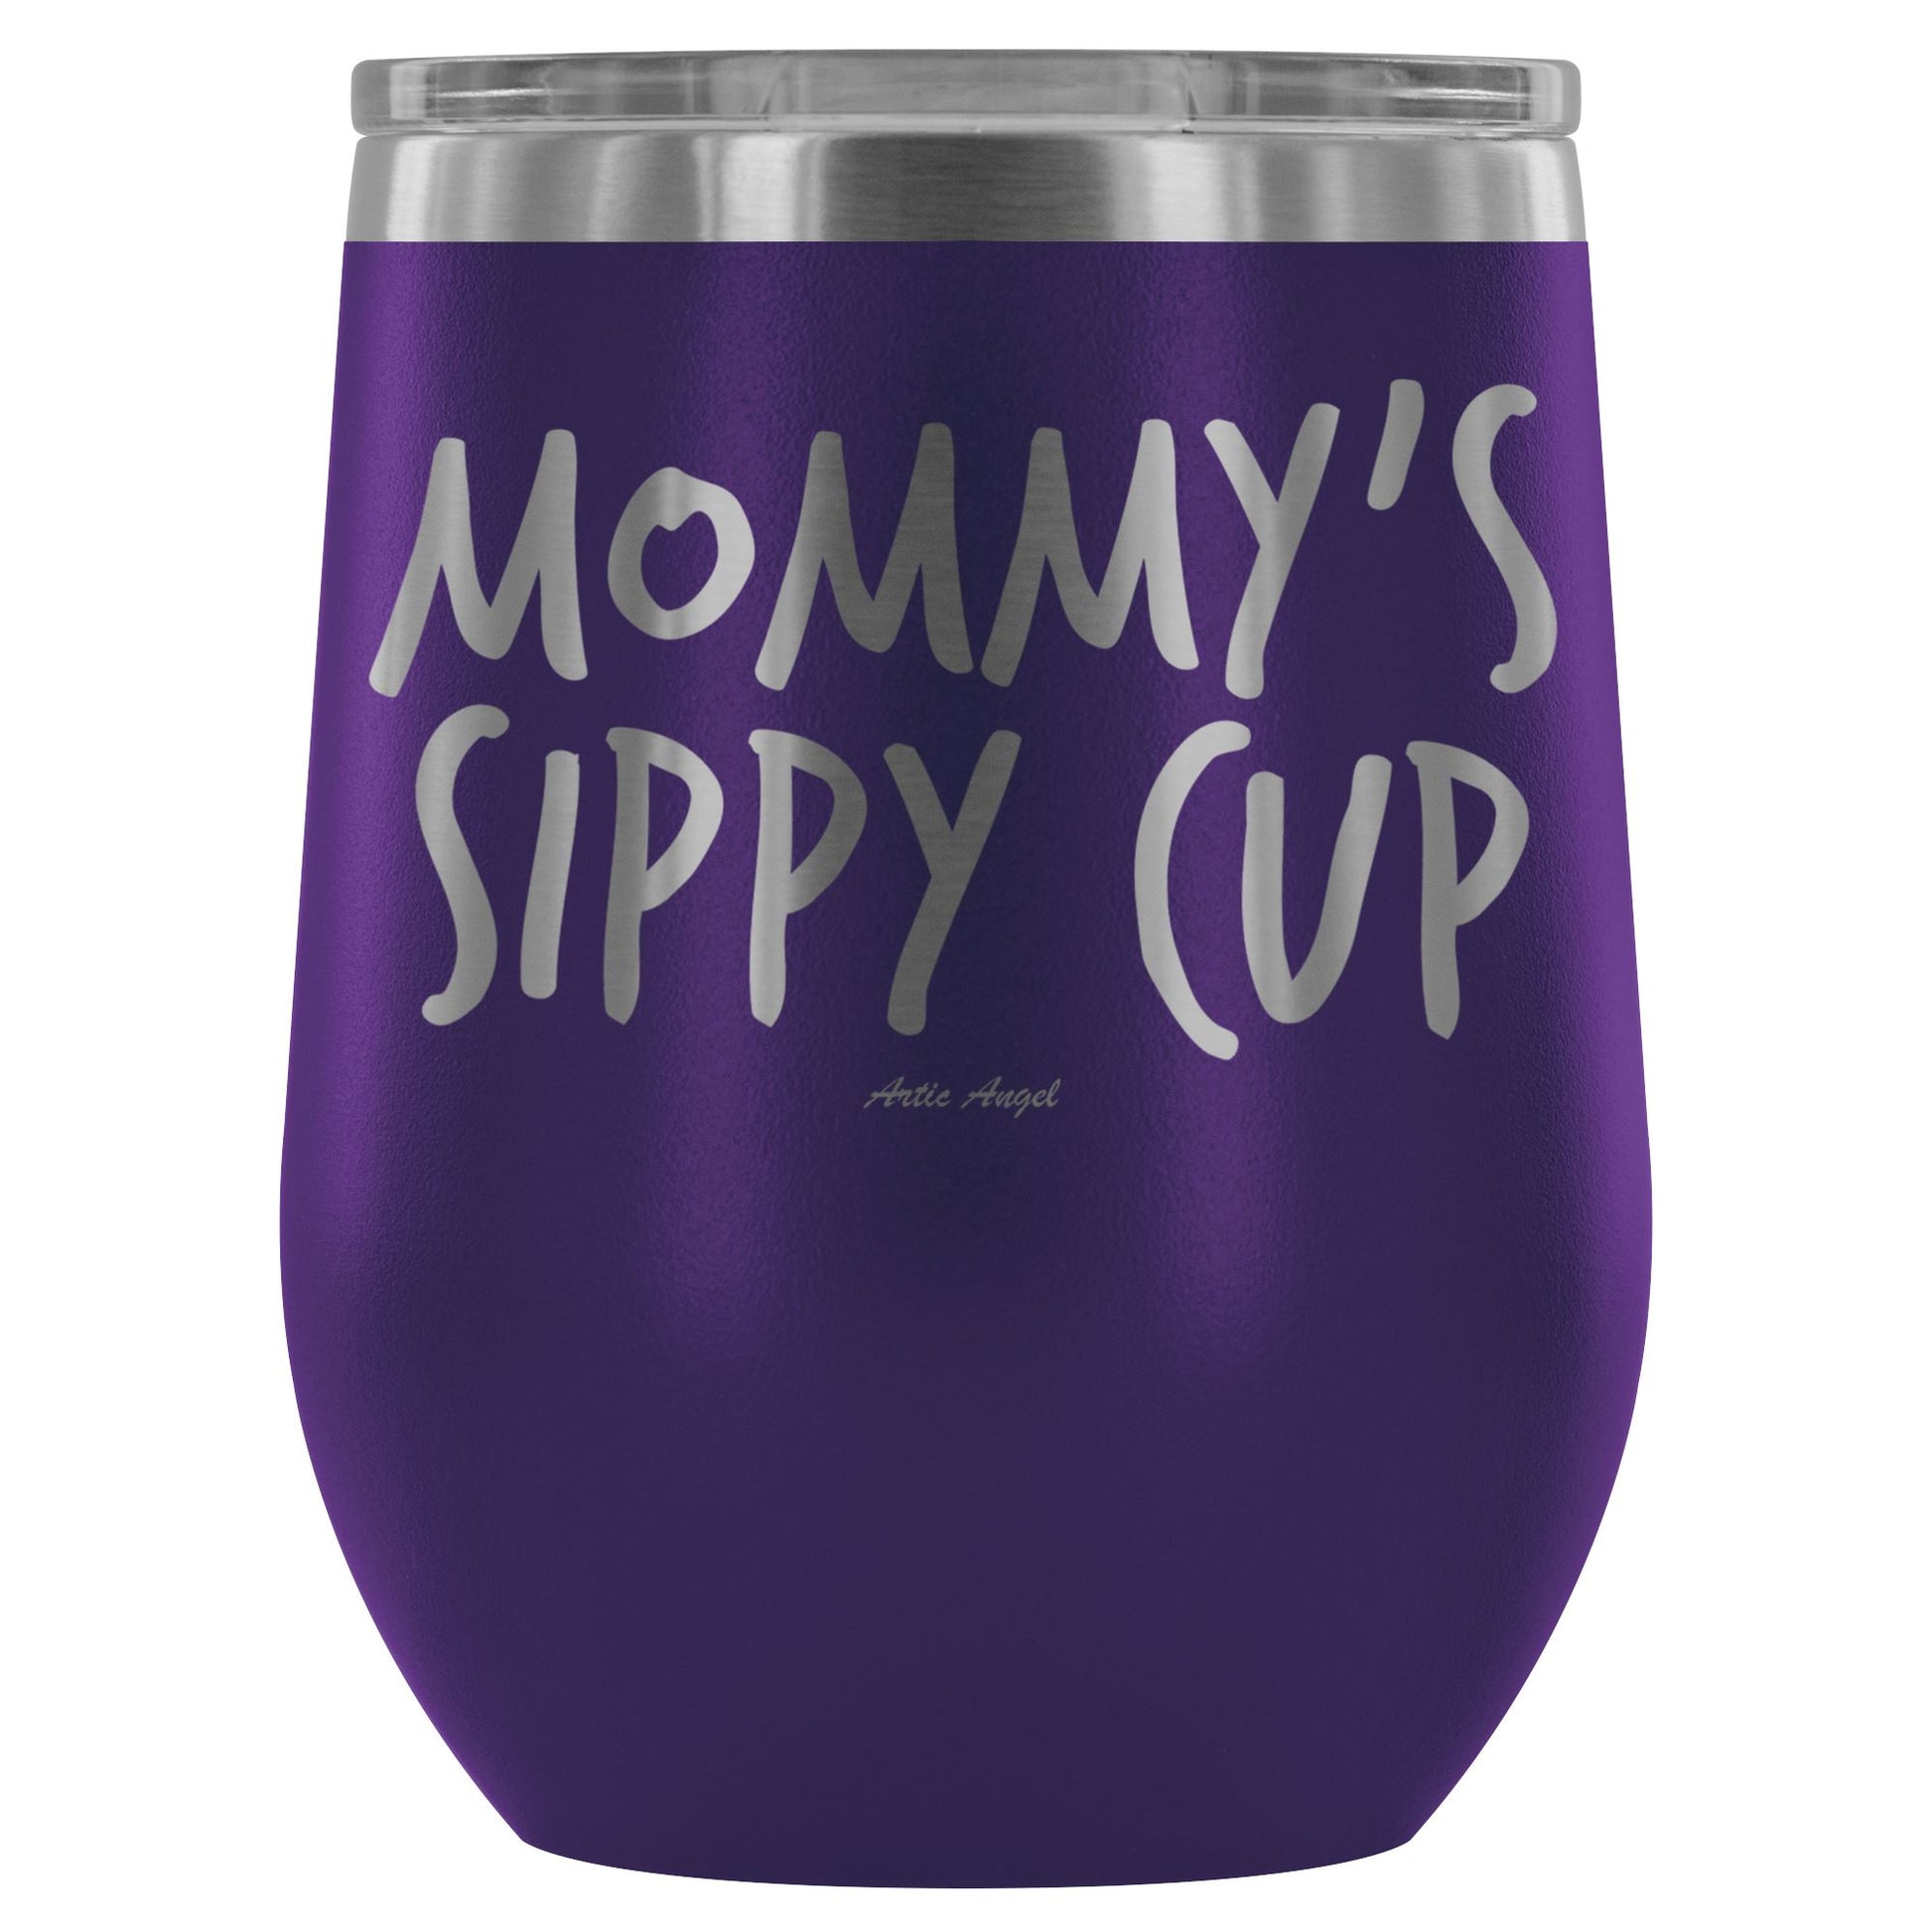 "Mommy's Sippy Cup" - Stemless Wine Cup Wine Tumbler Purple 